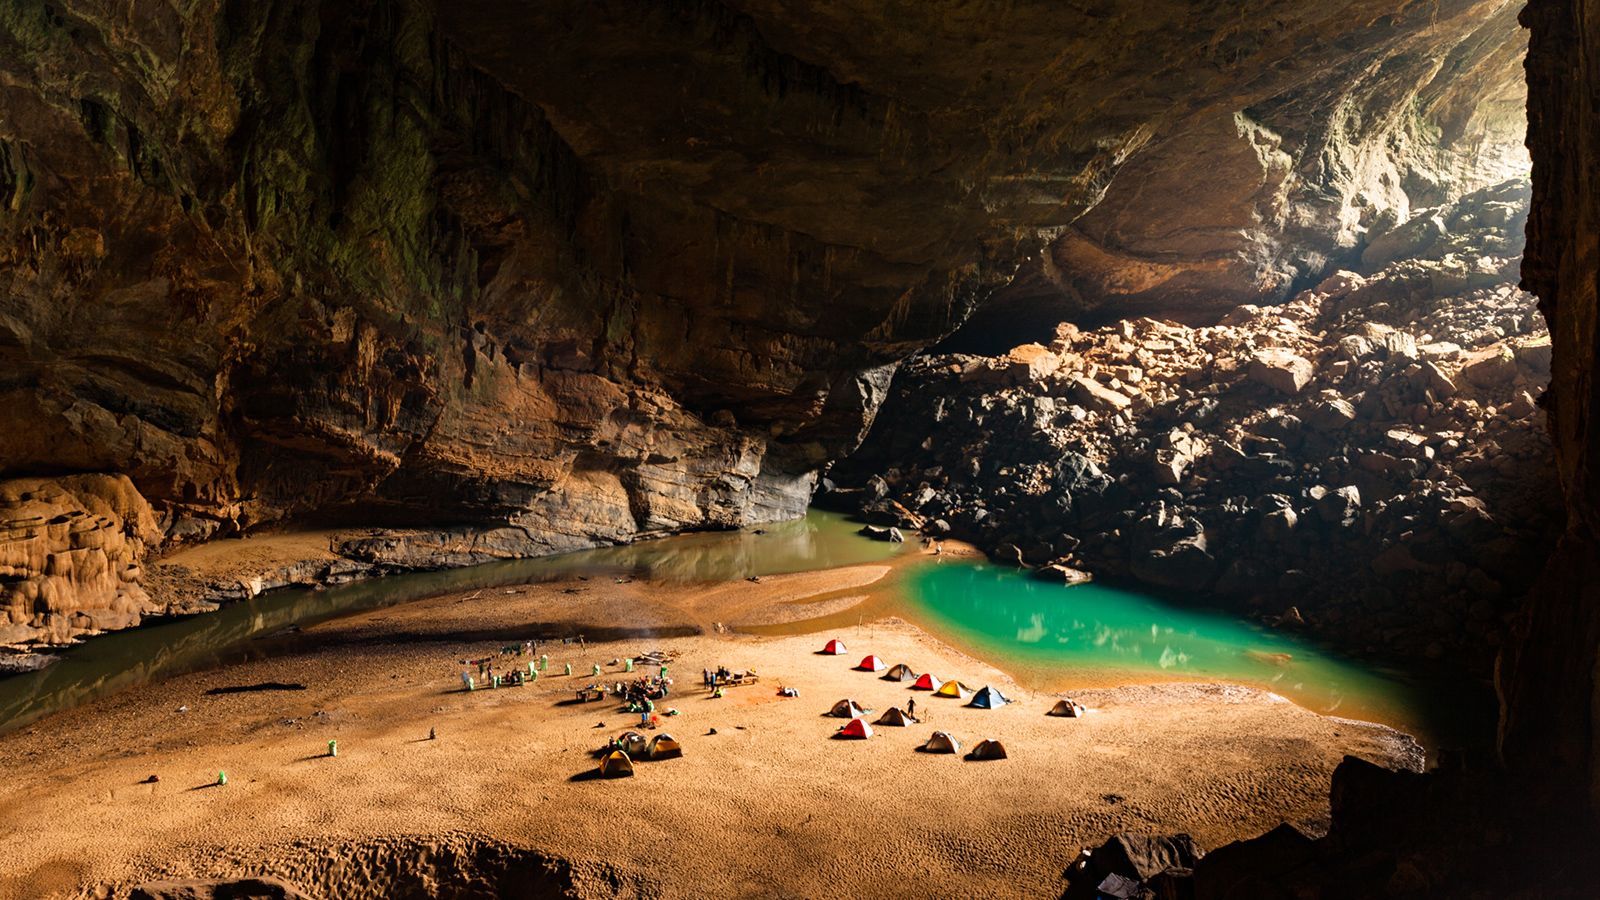 Cuc Phuong National Park has many majestic caves in the forest